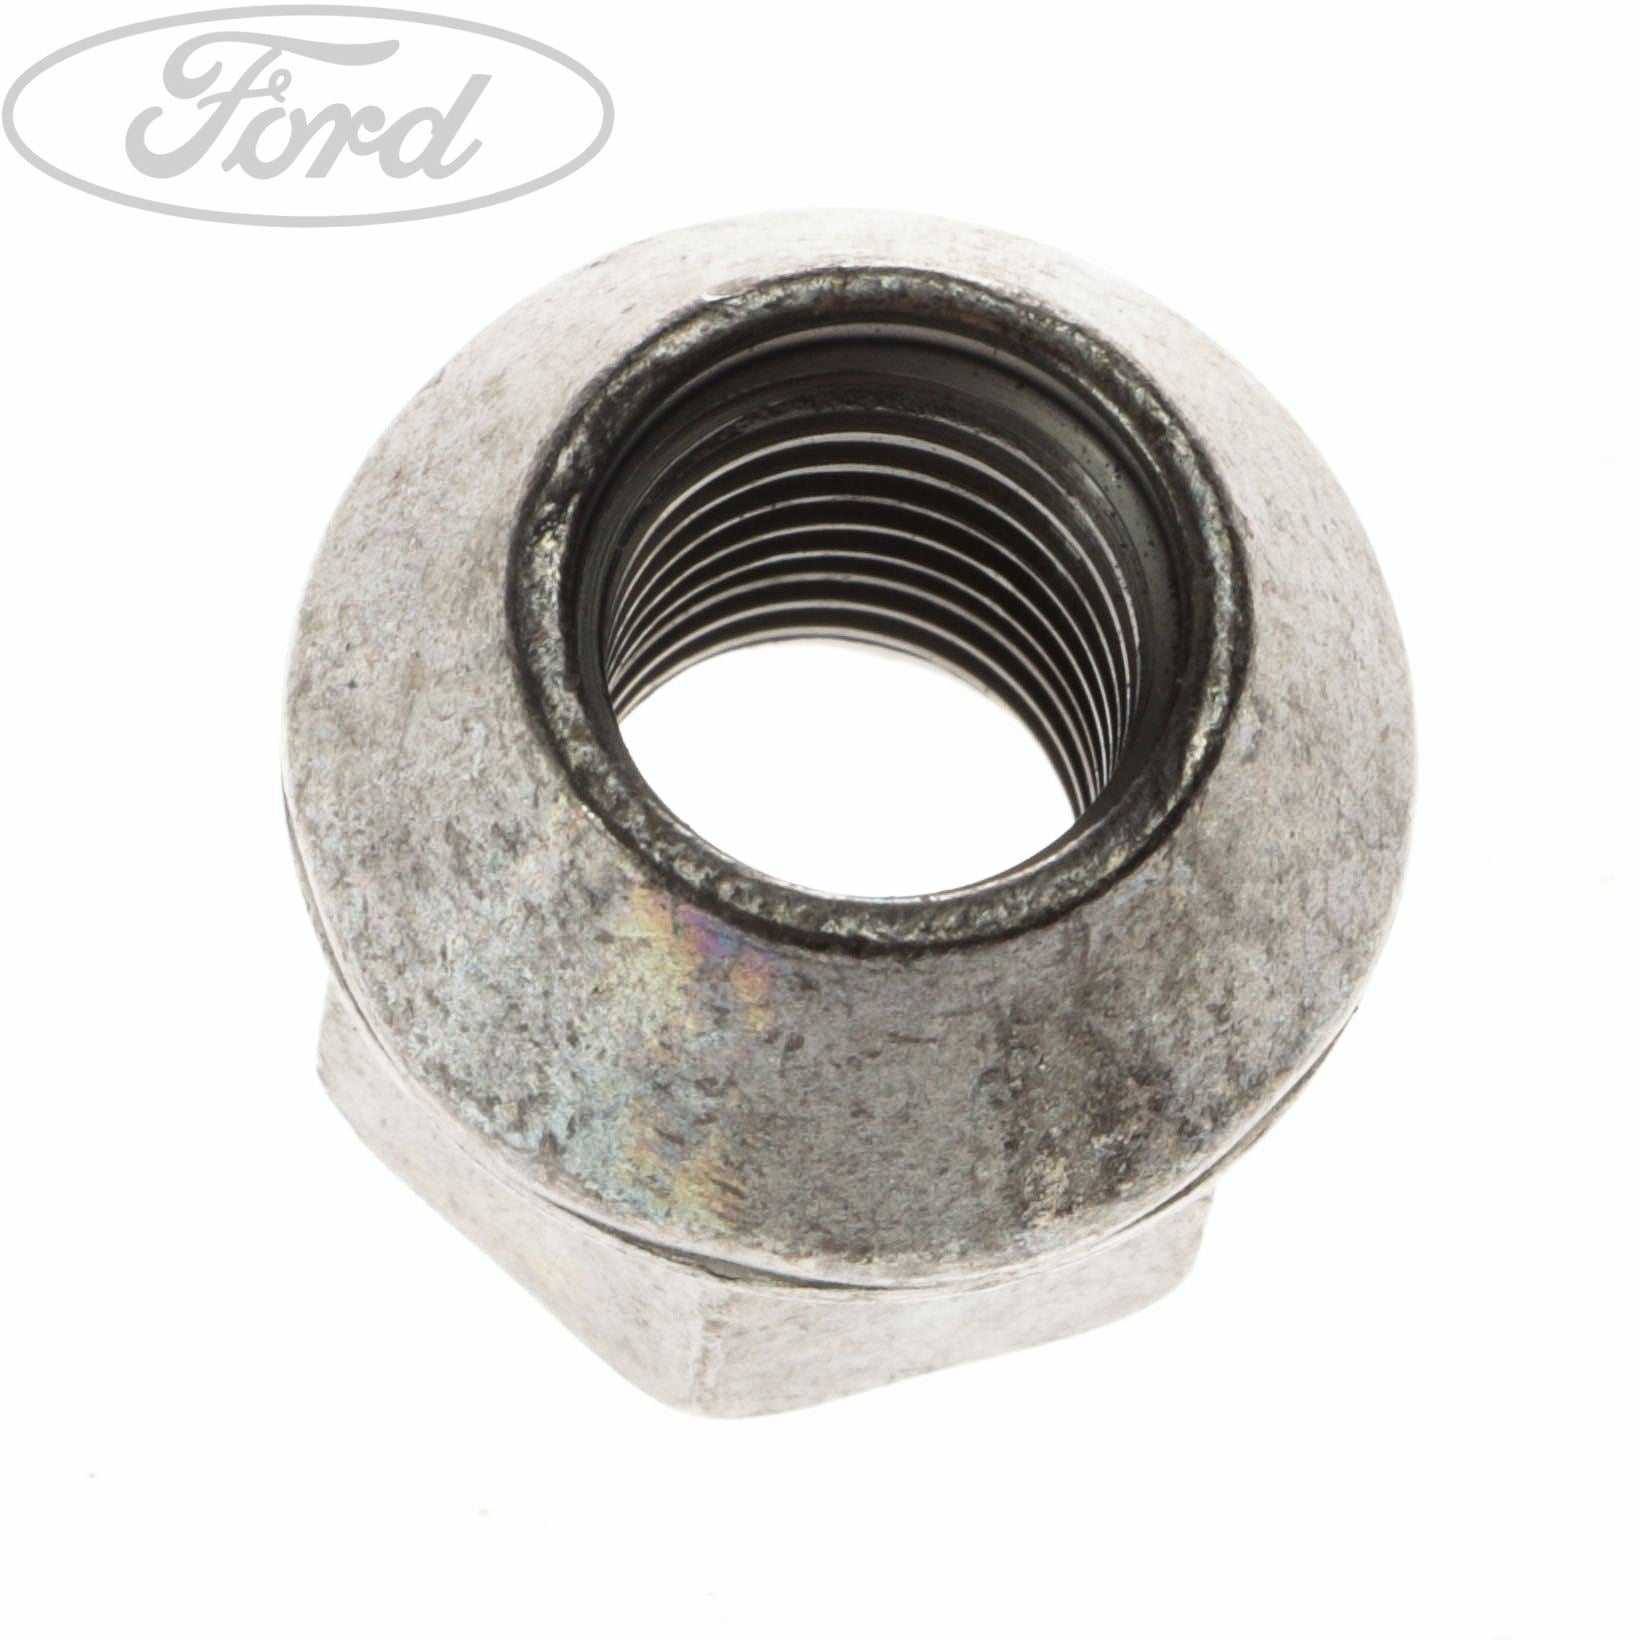 Ford, TRANSIT CONNECT STEEL WHEEL NUT X1 M12 X1.5MM 2002-2013